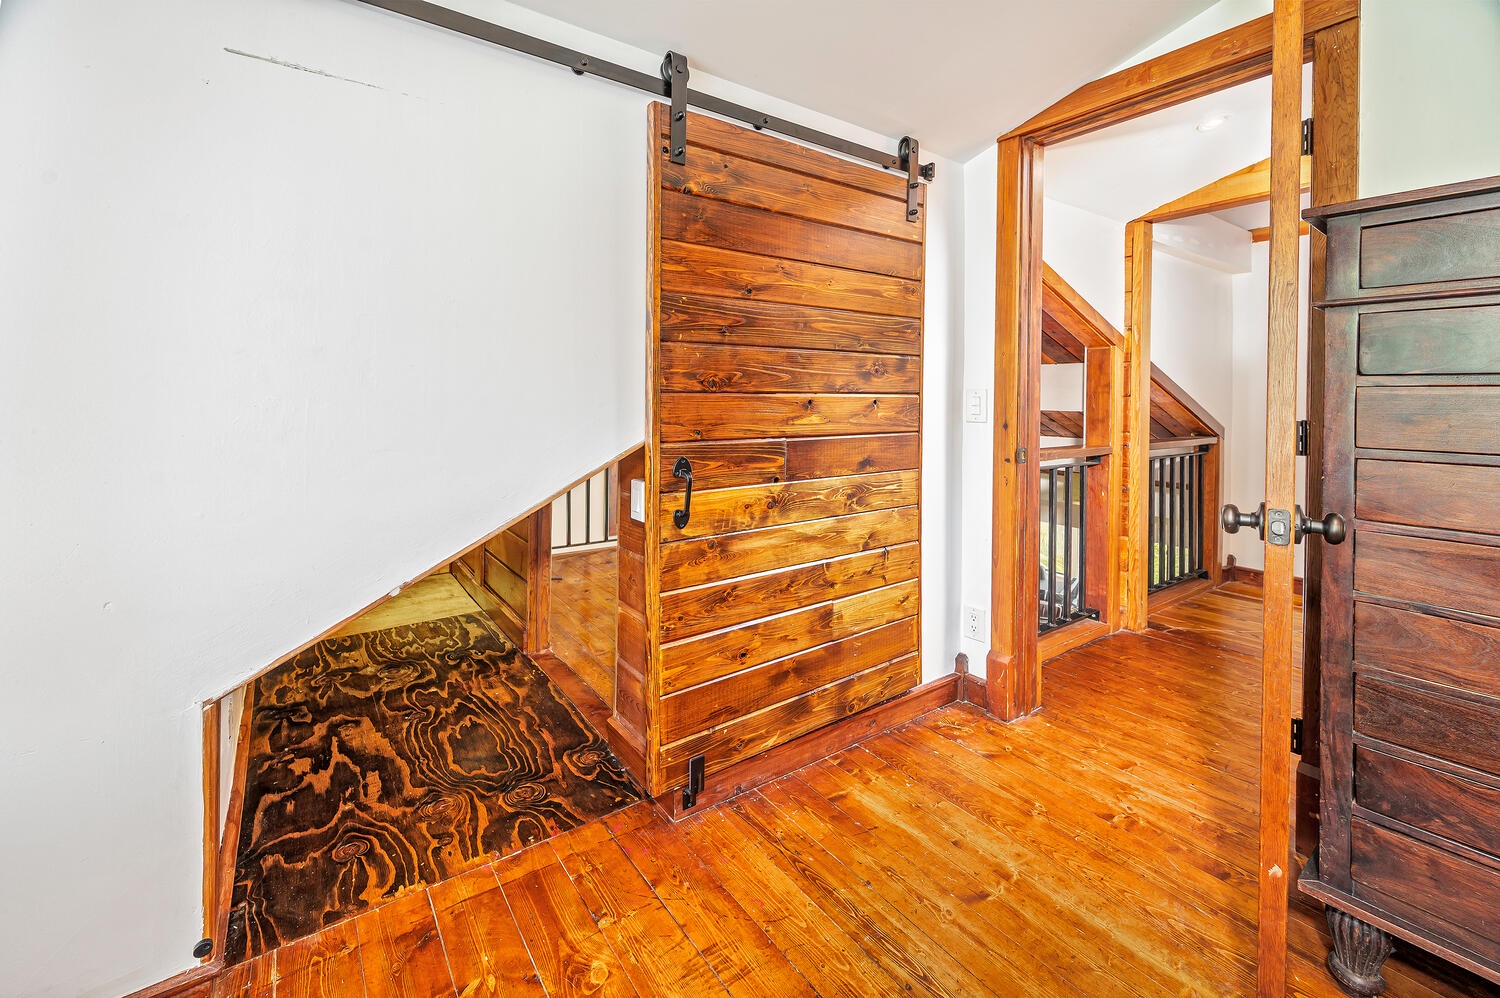 Haleiwa Vacation Rentals, Mele Makana - In bedroom 7, the entrance to the interior balcony can be closed with the wooden sliding door